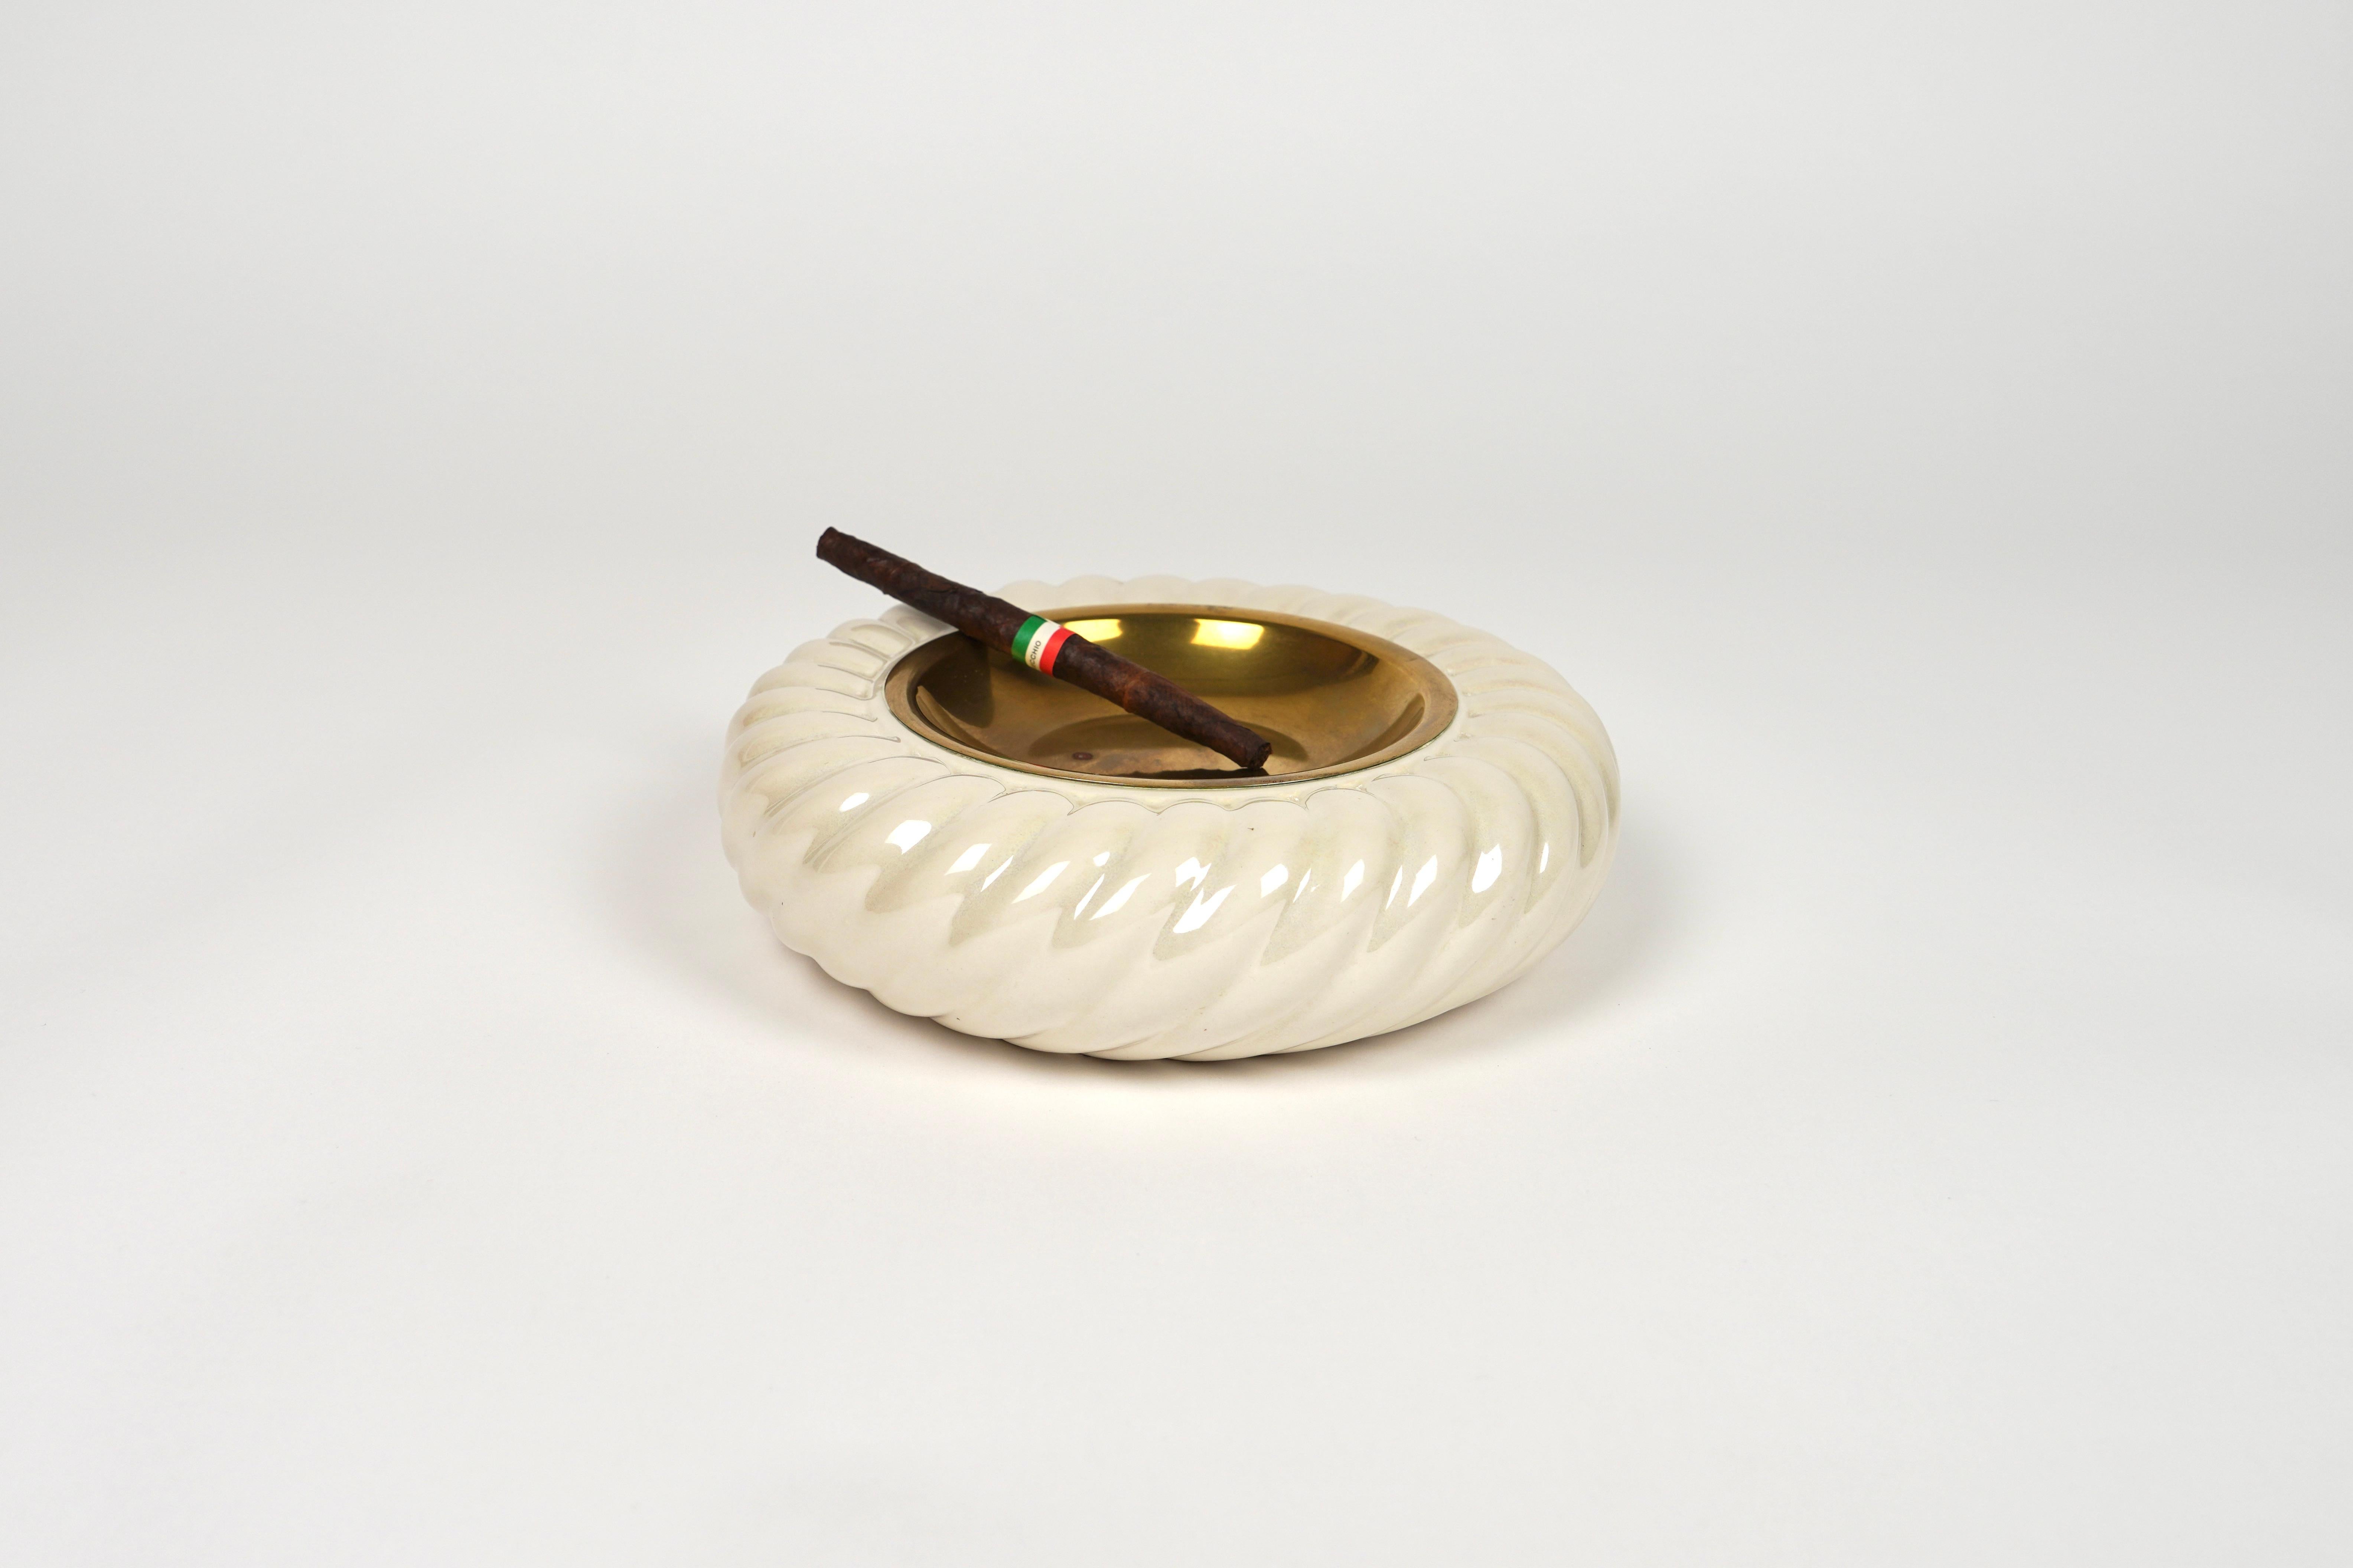 Set of Ashtray and Lighter in Ceramic and Brass by Tommaso Barbi, Italy 1970s For Sale 2